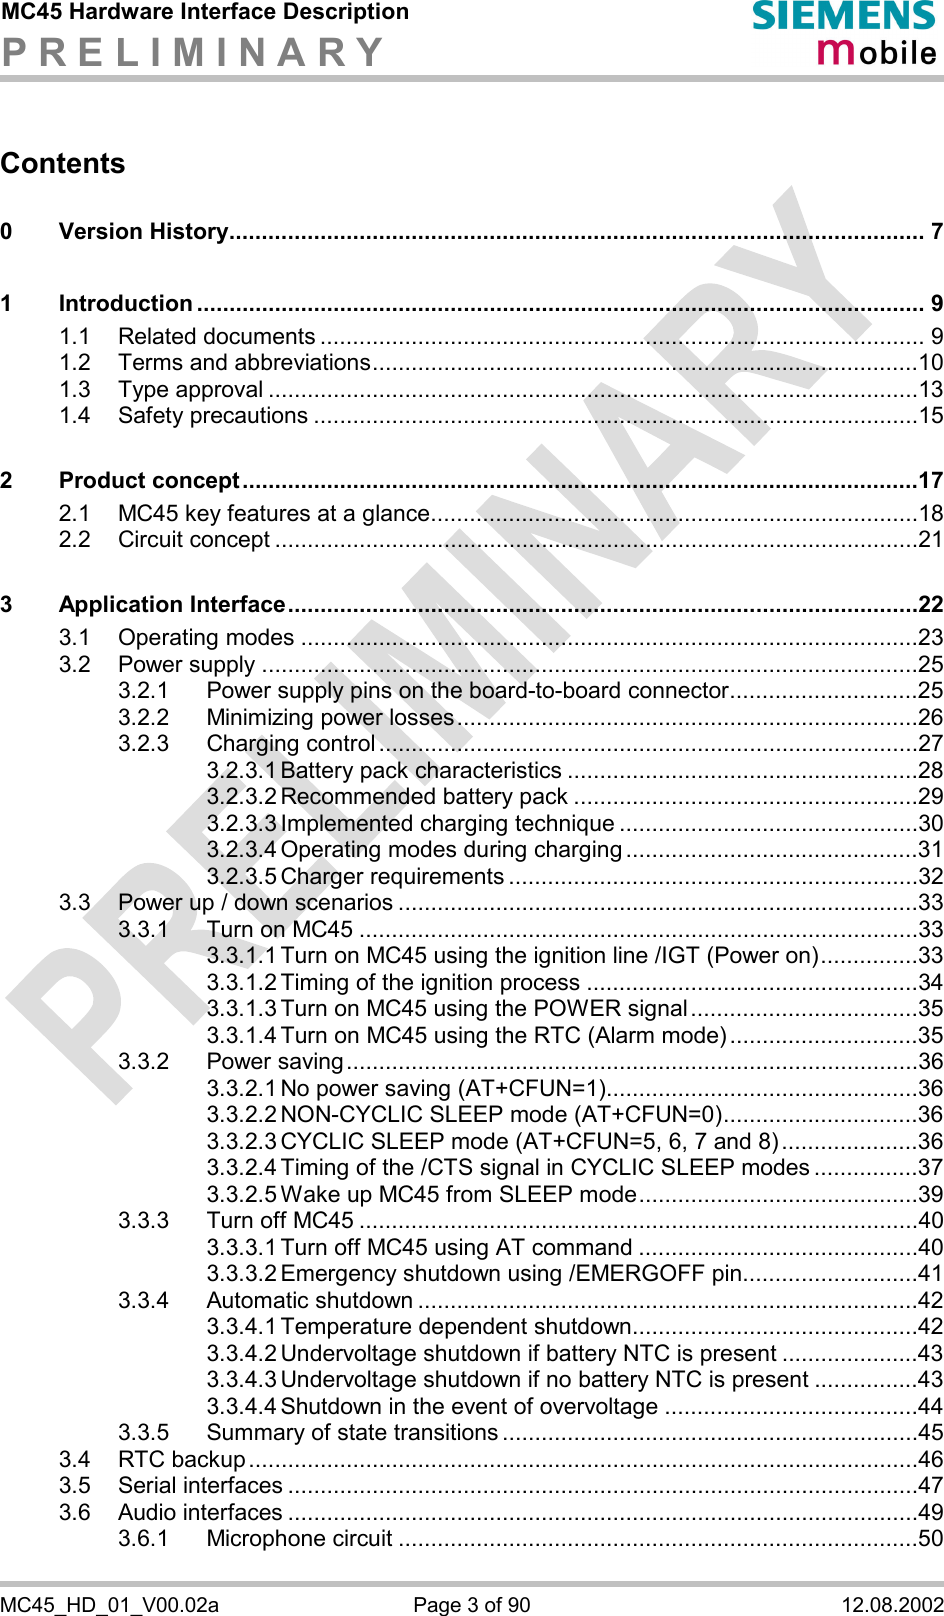 MC45 Hardware Interface Description P R E L I M I N A R Y      MC45_HD_01_V00.02a  Page 3 of 90  12.08.2002 Contents 0 Version History........................................................................................................... 7 1 Introduction ................................................................................................................ 9 1.1 Related documents ............................................................................................. 9 1.2 Terms and abbreviations....................................................................................10 1.3 Type approval ....................................................................................................13 1.4 Safety precautions .............................................................................................15 2 Product concept........................................................................................................17 2.1 MC45 key features at a glance...........................................................................18 2.2 Circuit concept ...................................................................................................21 3 Application Interface.................................................................................................22 3.1 Operating modes ...............................................................................................23 3.2 Power supply .....................................................................................................25 3.2.1 Power supply pins on the board-to-board connector.............................25 3.2.2 Minimizing power losses.......................................................................26 3.2.3 Charging control...................................................................................27 3.2.3.1 Battery pack characteristics ......................................................28 3.2.3.2 Recommended battery pack .....................................................29 3.2.3.3 Implemented charging technique ..............................................30 3.2.3.4 Operating modes during charging .............................................31 3.2.3.5 Charger requirements ...............................................................32 3.3 Power up / down scenarios ................................................................................33 3.3.1 Turn on MC45 ......................................................................................33 3.3.1.1 Turn on MC45 using the ignition line /IGT (Power on)...............33 3.3.1.2 Timing of the ignition process ...................................................34 3.3.1.3 Turn on MC45 using the POWER signal...................................35 3.3.1.4 Turn on MC45 using the RTC (Alarm mode).............................35 3.3.2 Power saving........................................................................................36 3.3.2.1 No power saving (AT+CFUN=1)................................................36 3.3.2.2 NON-CYCLIC SLEEP mode (AT+CFUN=0)..............................36 3.3.2.3 CYCLIC SLEEP mode (AT+CFUN=5, 6, 7 and 8).....................36 3.3.2.4 Timing of the /CTS signal in CYCLIC SLEEP modes ................37 3.3.2.5 Wake up MC45 from SLEEP mode...........................................39 3.3.3 Turn off MC45 ......................................................................................40 3.3.3.1 Turn off MC45 using AT command ...........................................40 3.3.3.2 Emergency shutdown using /EMERGOFF pin...........................41 3.3.4 Automatic shutdown .............................................................................42 3.3.4.1 Temperature dependent shutdown............................................42 3.3.4.2 Undervoltage shutdown if battery NTC is present .....................43 3.3.4.3 Undervoltage shutdown if no battery NTC is present ................43 3.3.4.4 Shutdown in the event of overvoltage .......................................44 3.3.5 Summary of state transitions ................................................................45 3.4 RTC backup.......................................................................................................46 3.5 Serial interfaces .................................................................................................47 3.6 Audio interfaces .................................................................................................49 3.6.1 Microphone circuit ................................................................................50 